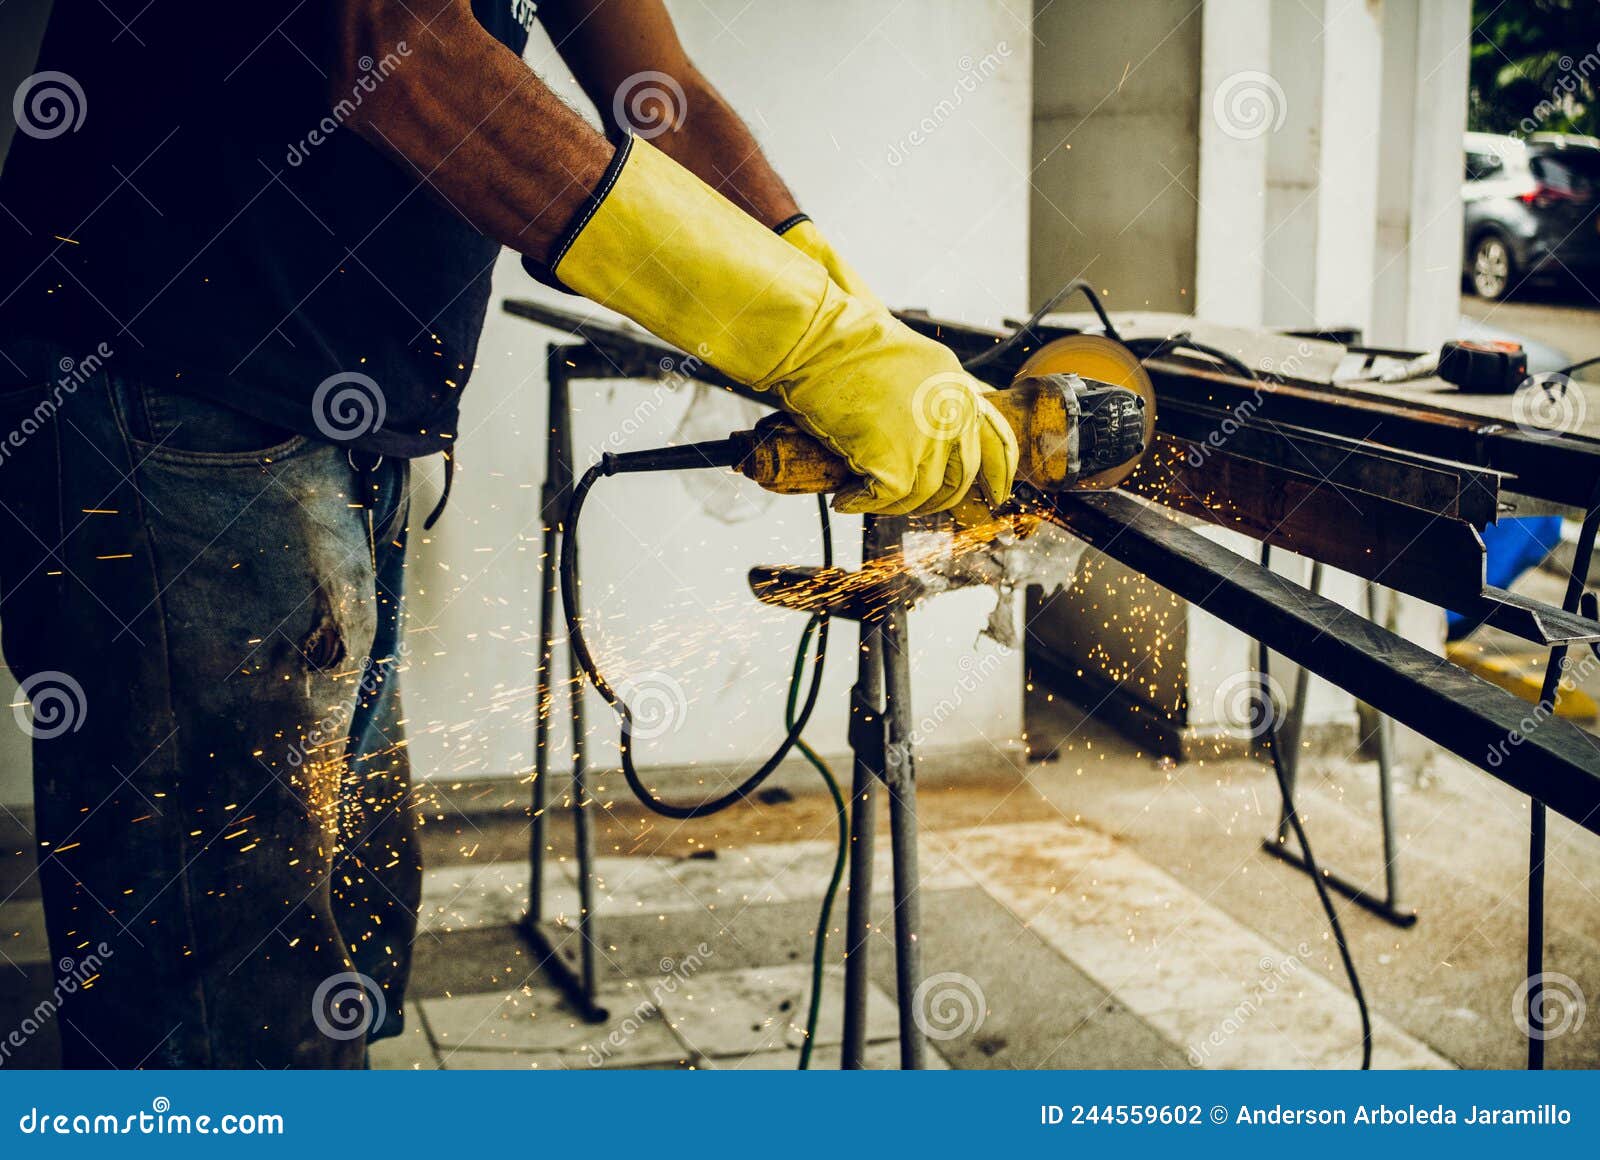 man working with construction tool